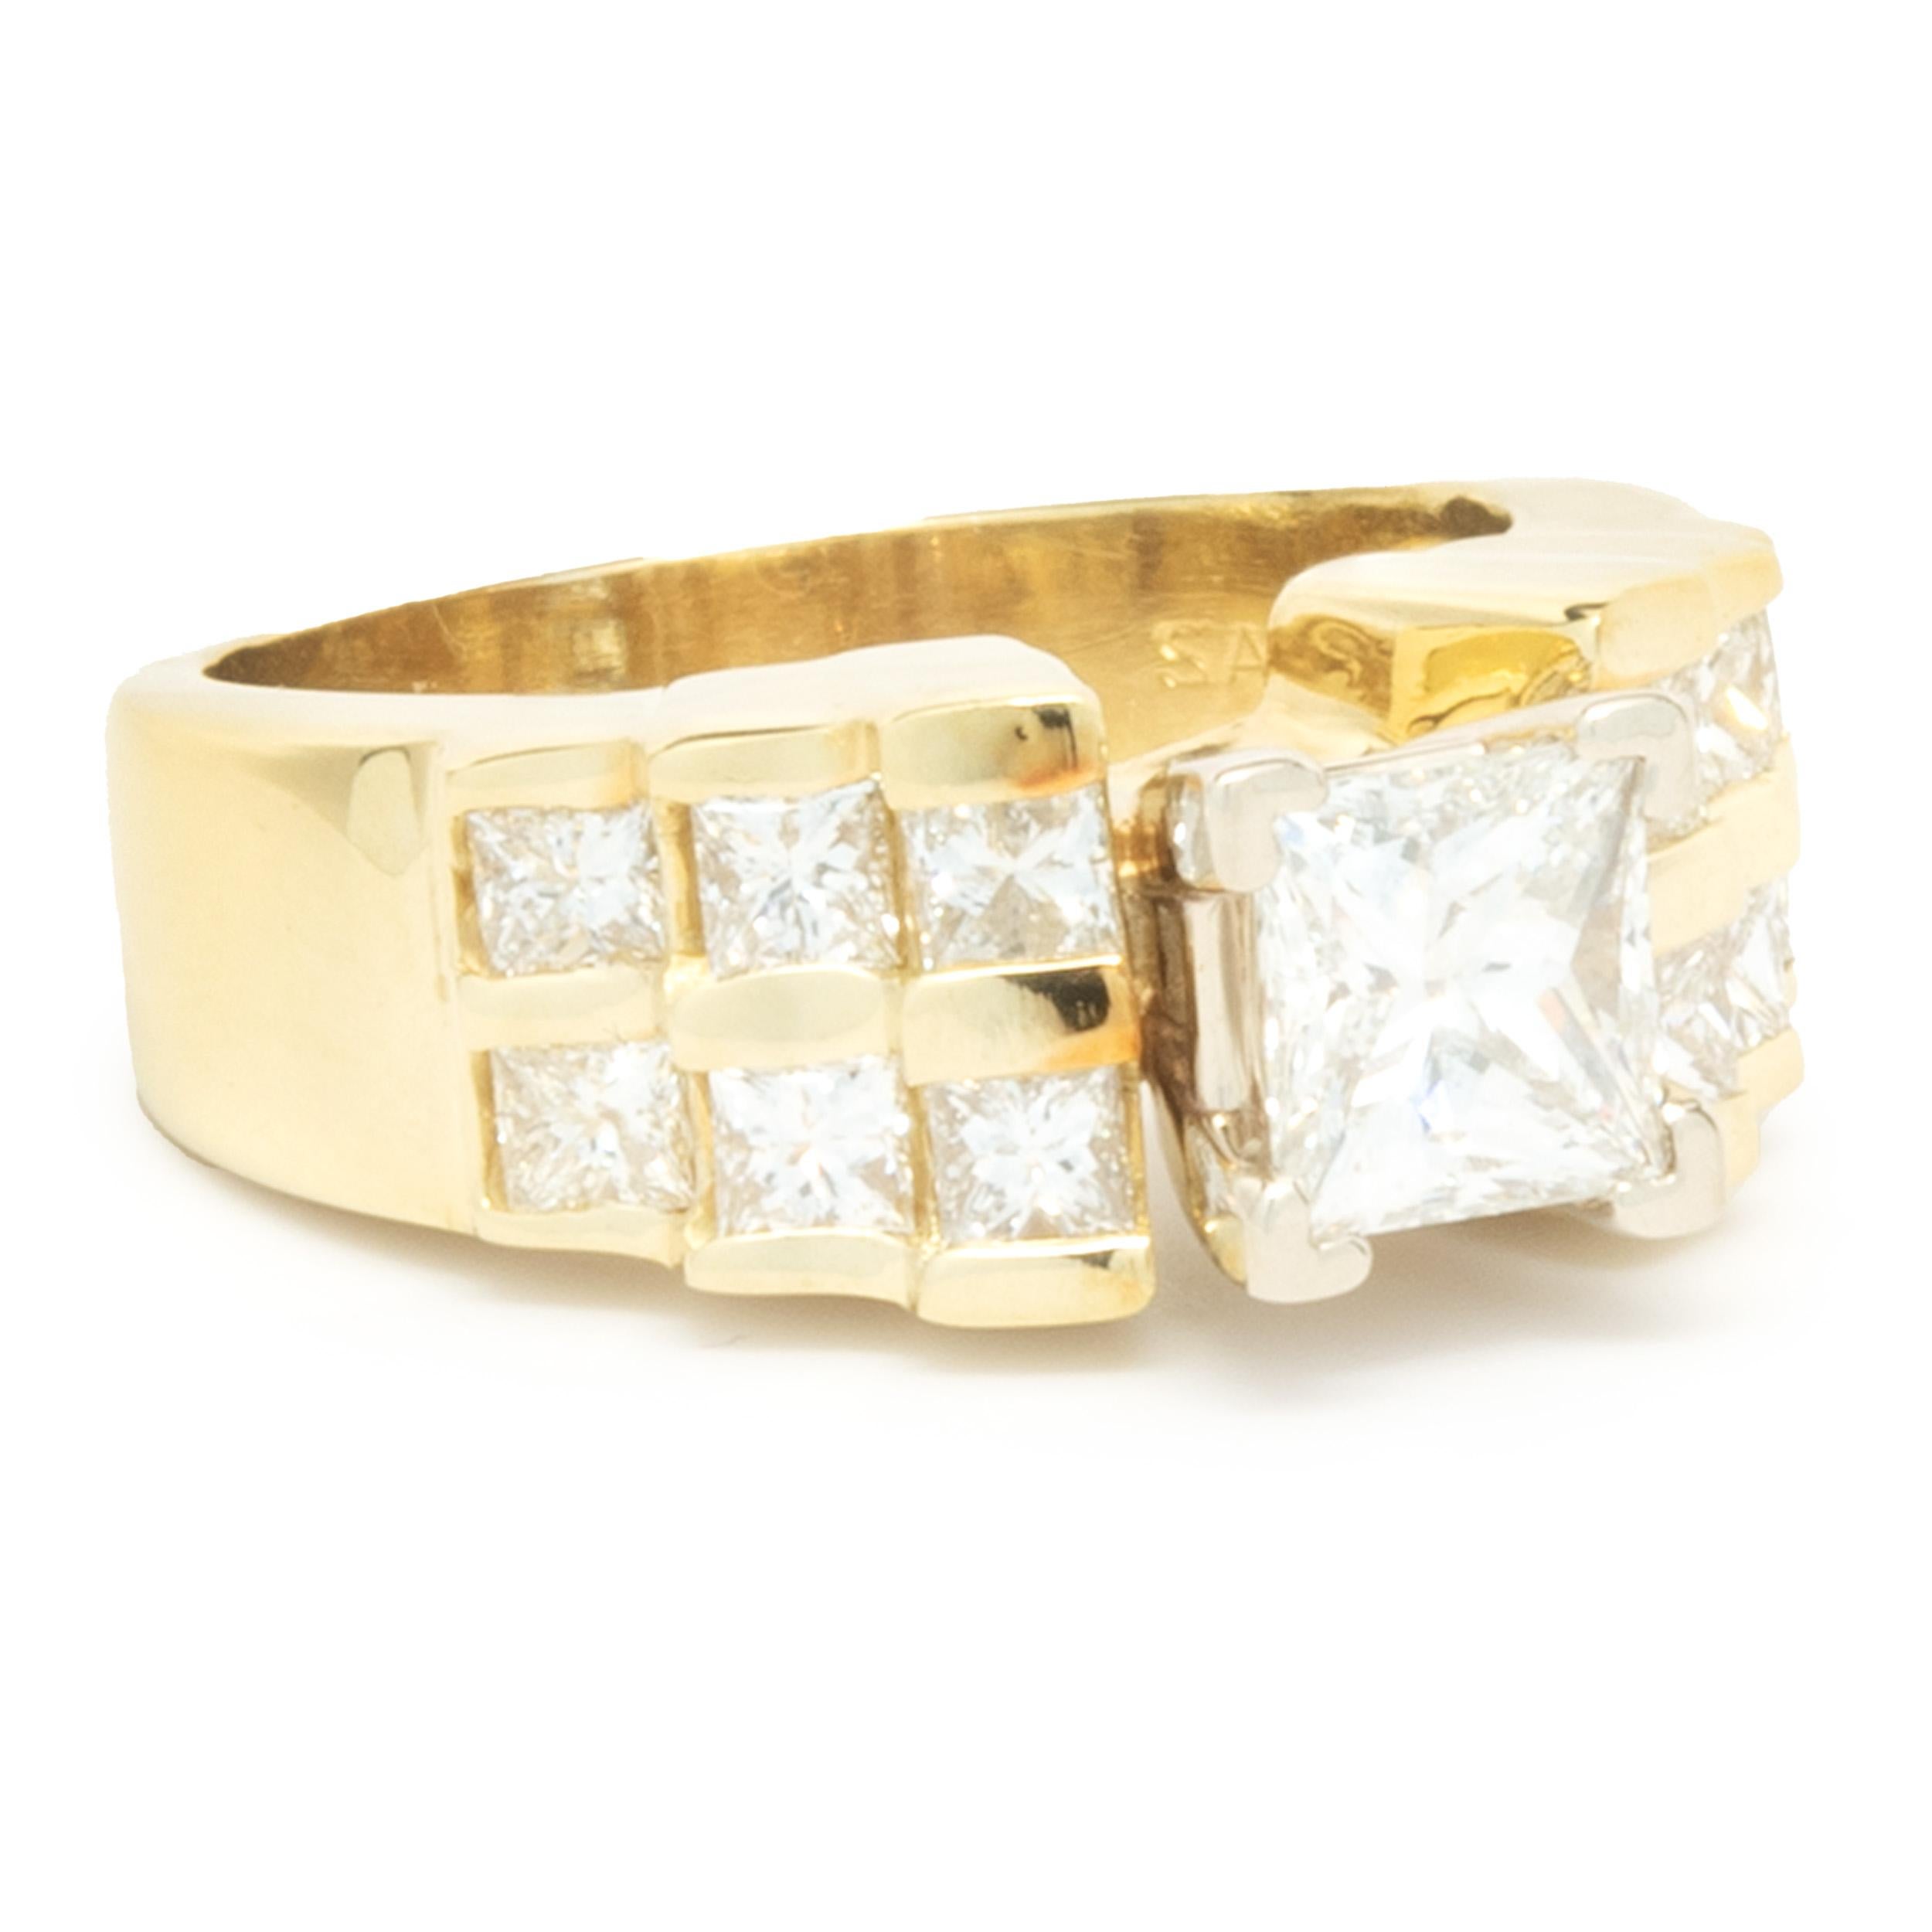 Designer: custom
Material: 18K yellow gold
Diamond: 1 princess cut = 1.44ct
Color: H
Clarity: VS2
Diamond: 12 princess cut = 1.00cttw
Color: H 
Clarity: VS2
Dimensions: ring top measures 8.5 mm wide
Ring Size: 6.5 (complimentary sizing